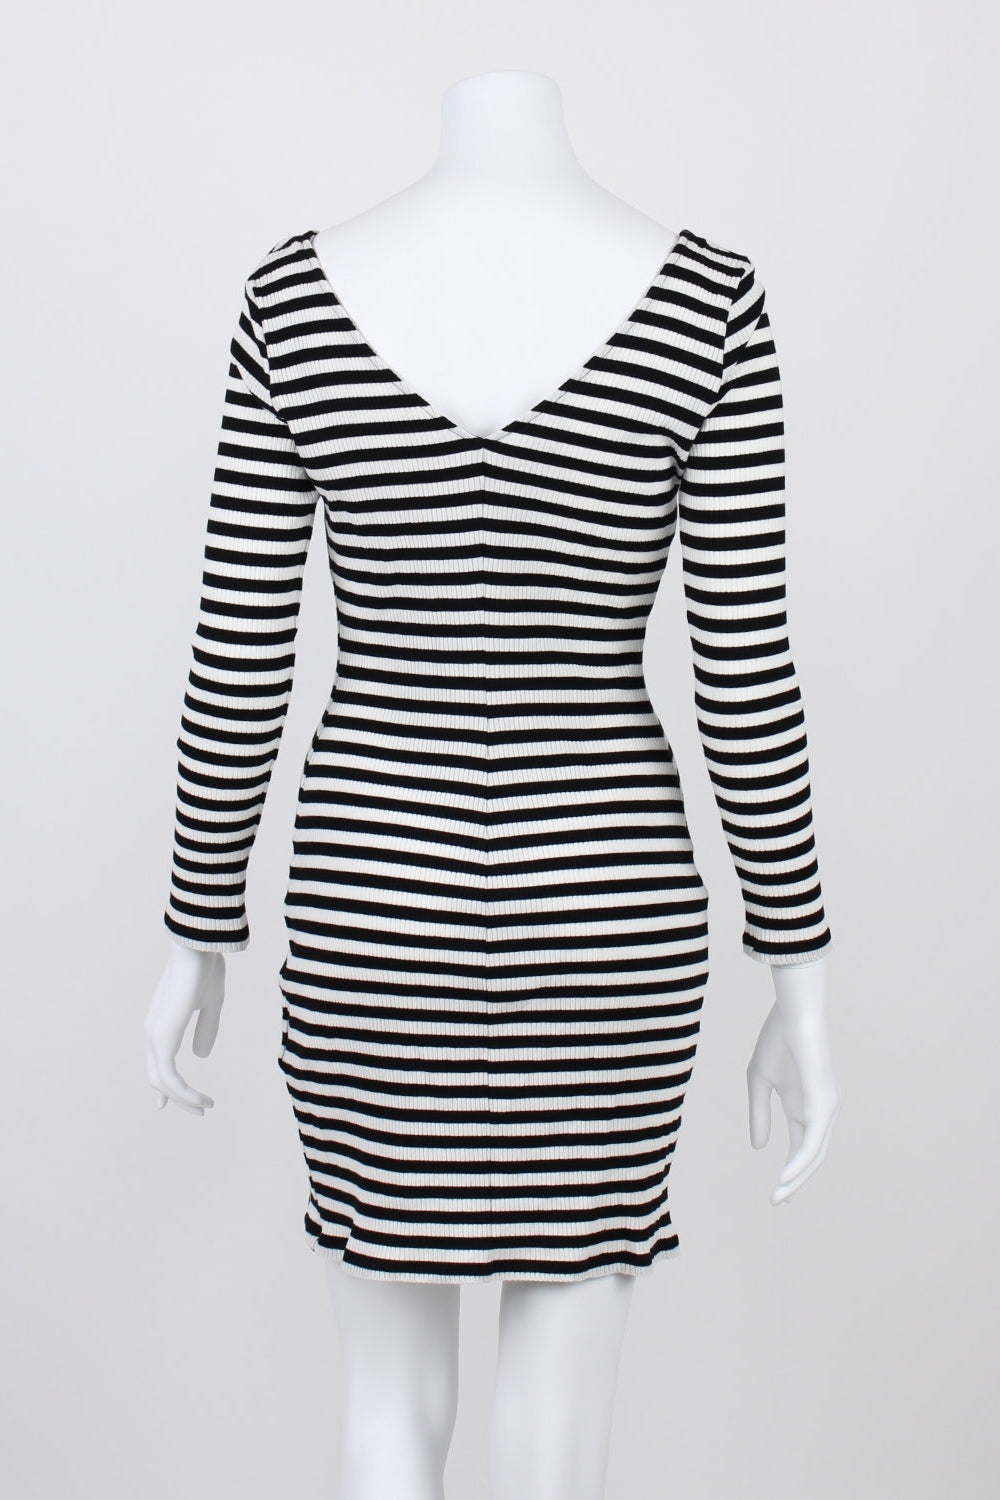 & Other Stories Striped Ribbed Bodycon Black And White  Dress 12